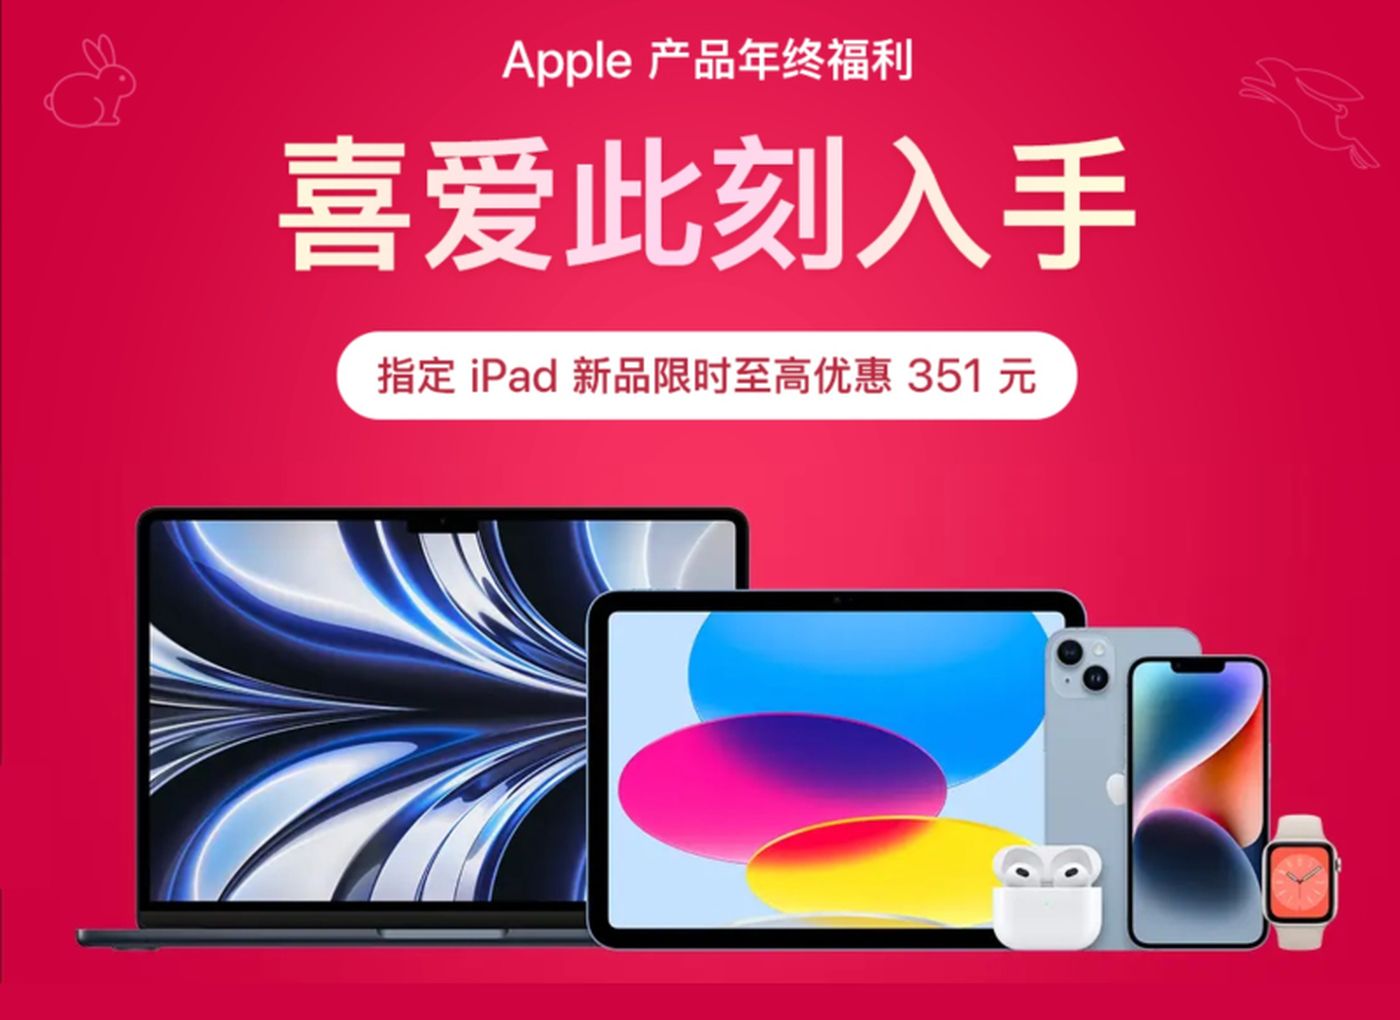 JD.com kicks off Chinese New Year early with huge iPhone 14 deals